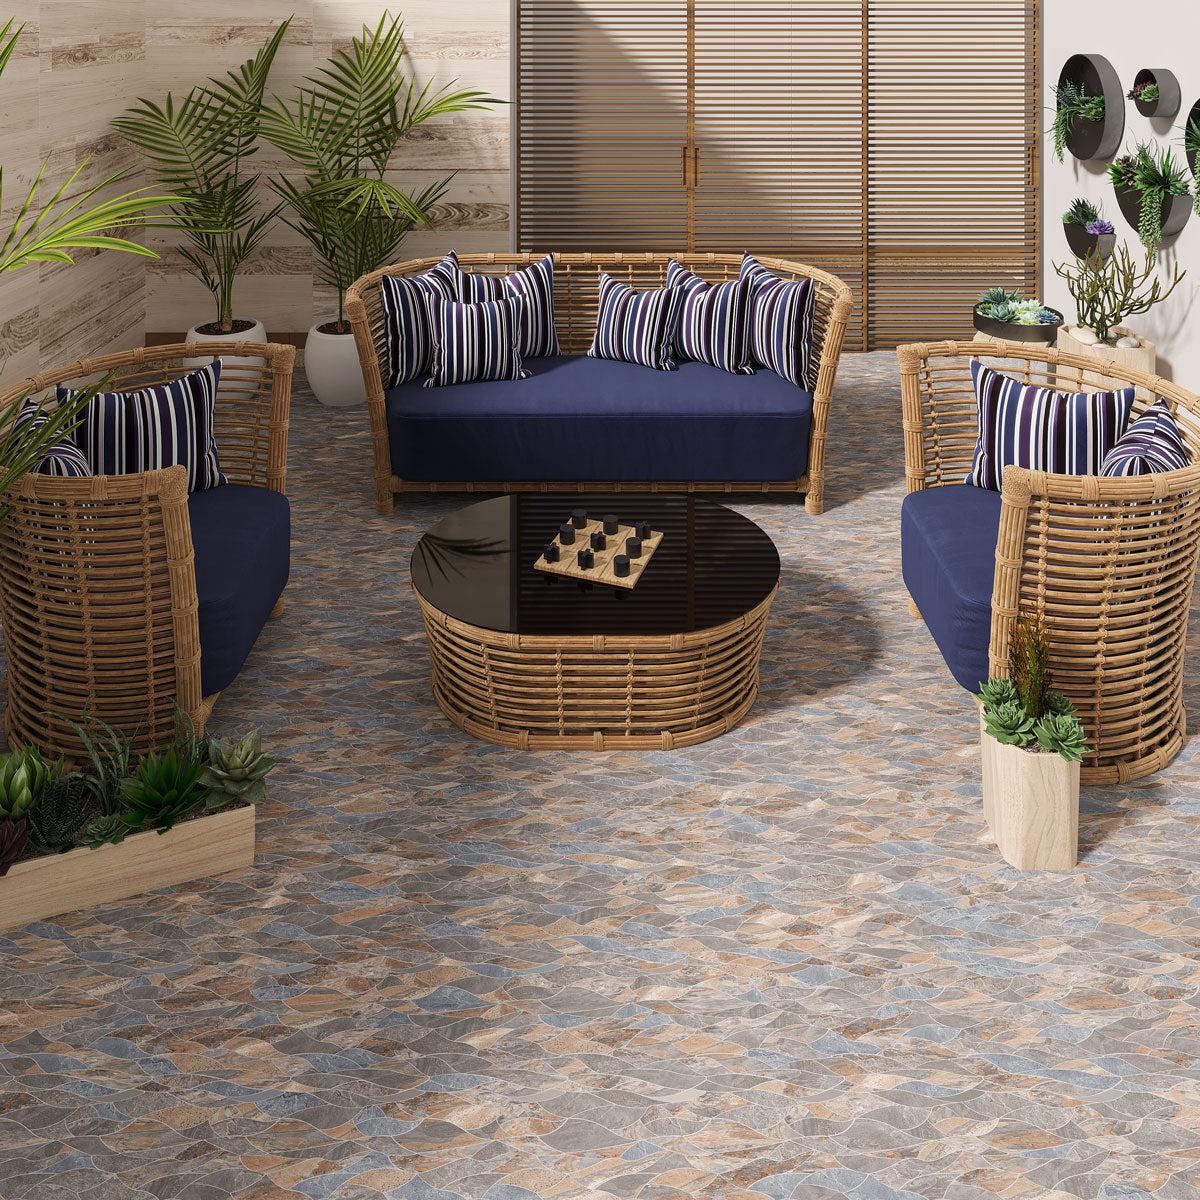 Slate mosaic flooring for an outdoor patio